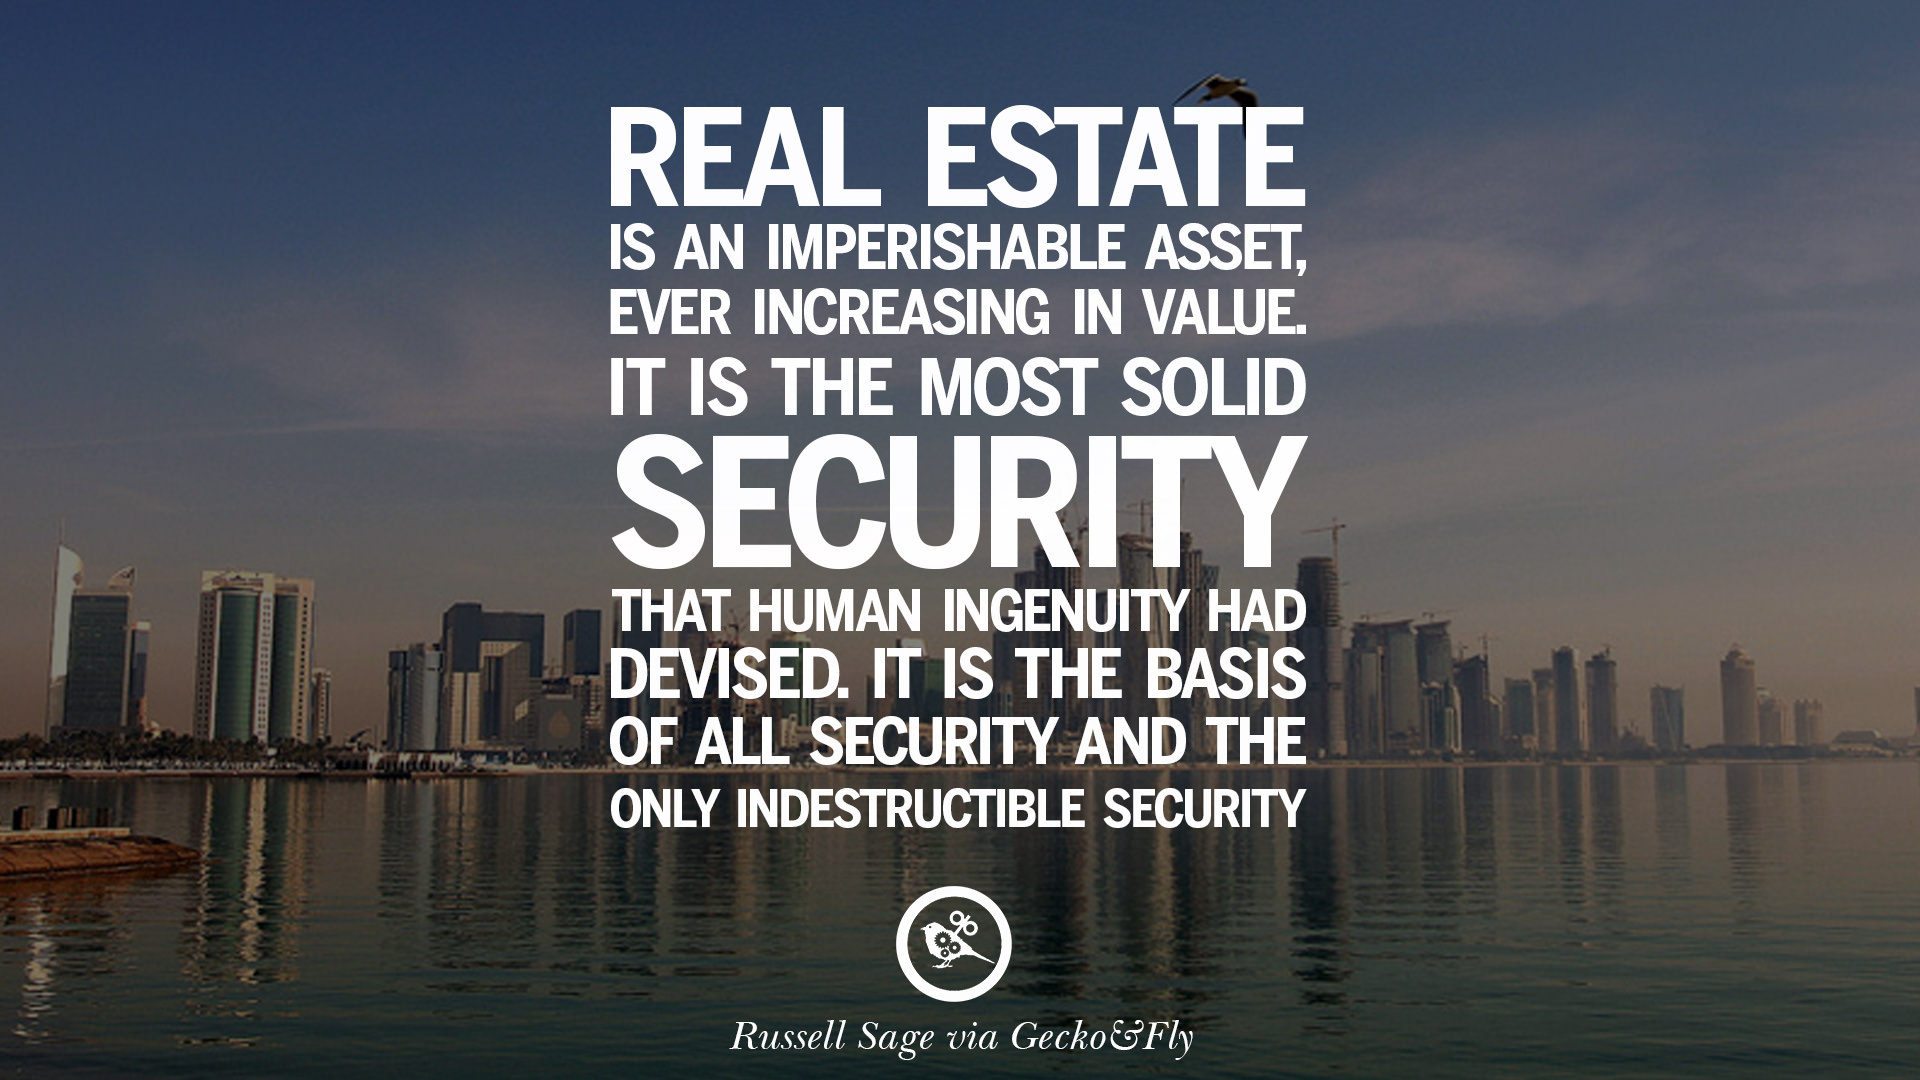 property-investment-investing-quotes-10.jpg